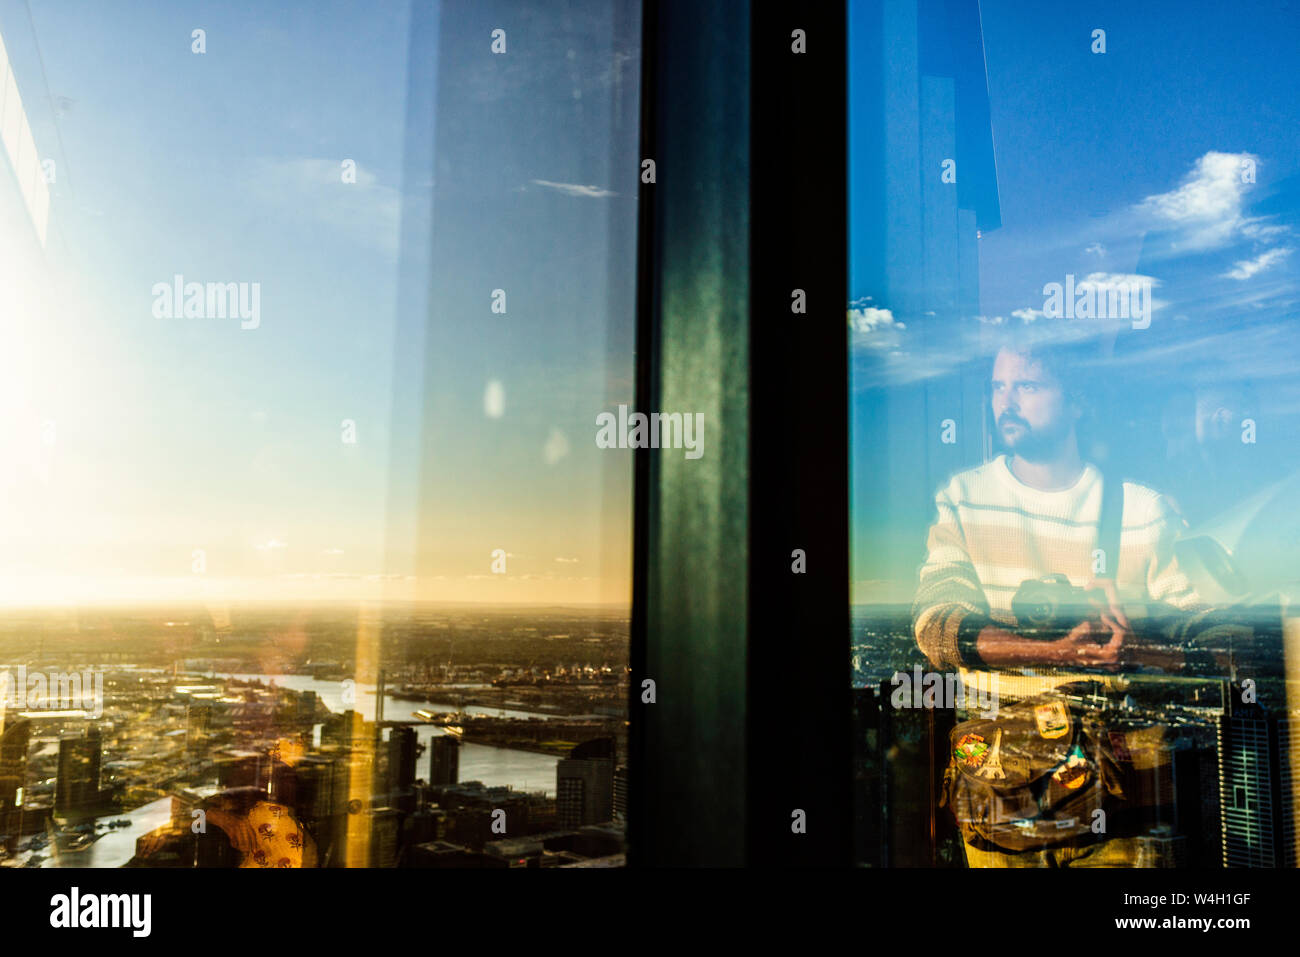 Reflection of man in glass with cityscape of Melbourne, Victoria, Australia Stock Photo